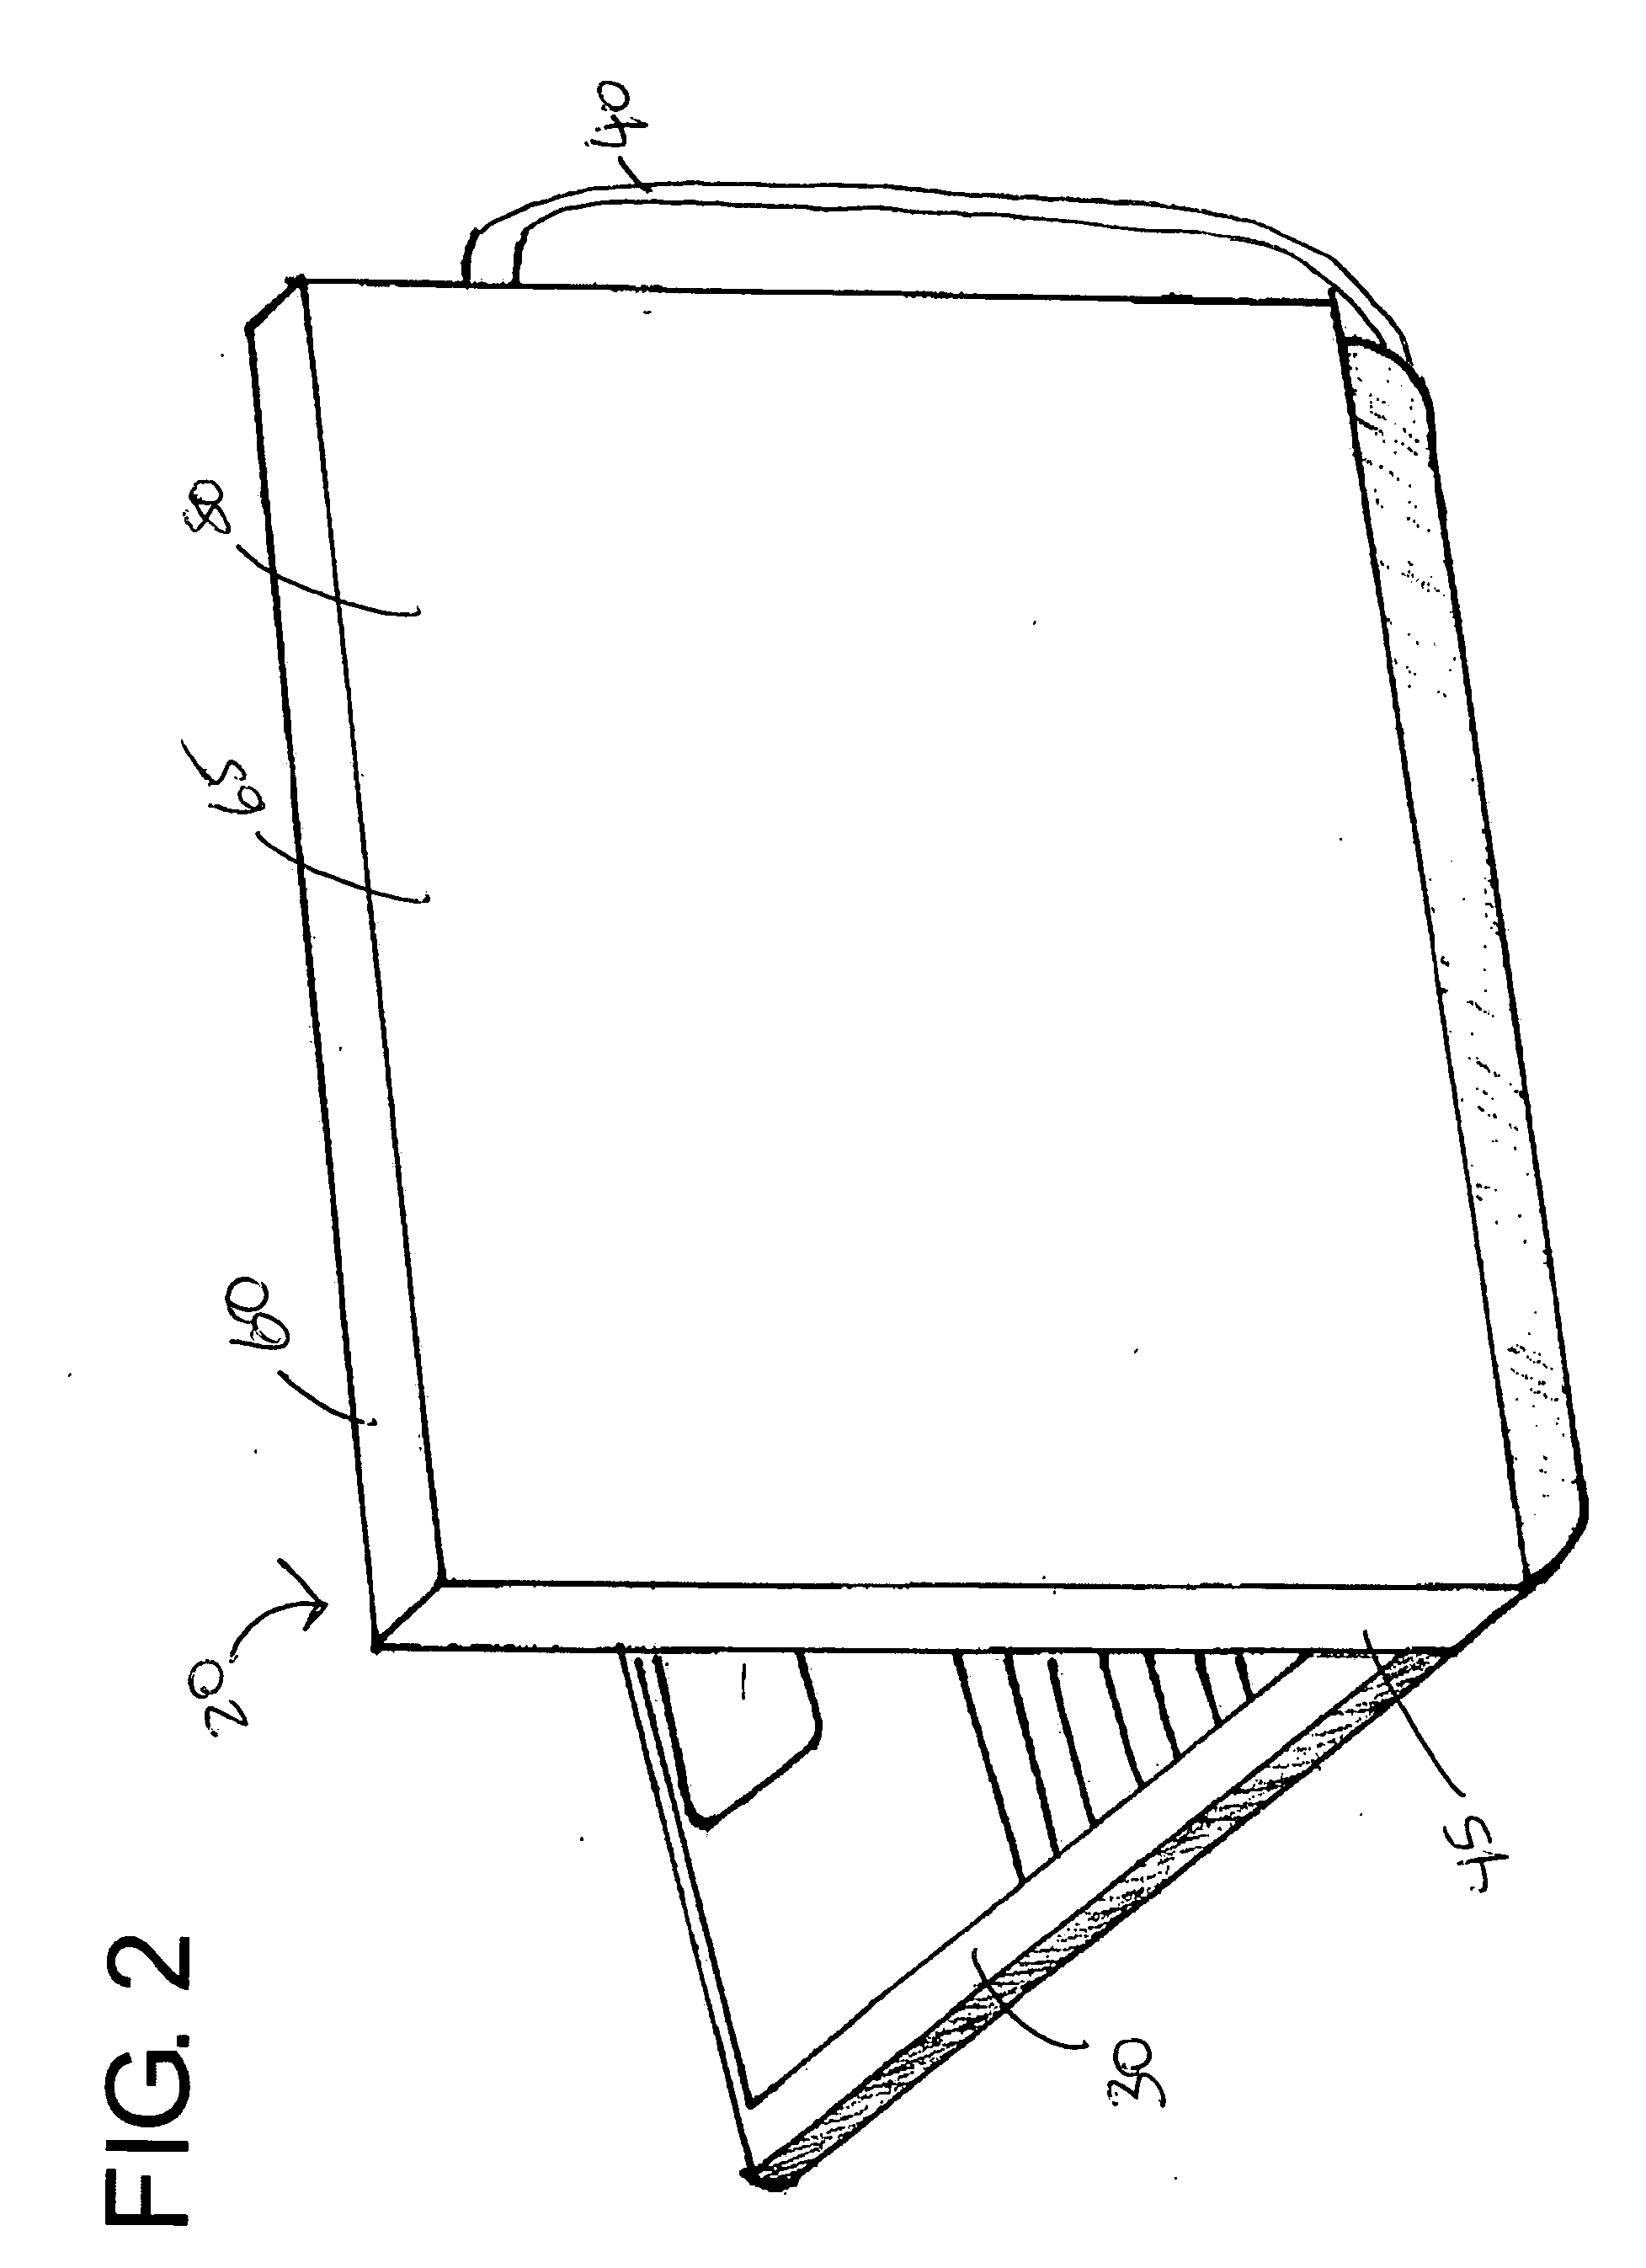 Slipcover touch input apparatus for displays of computing devices